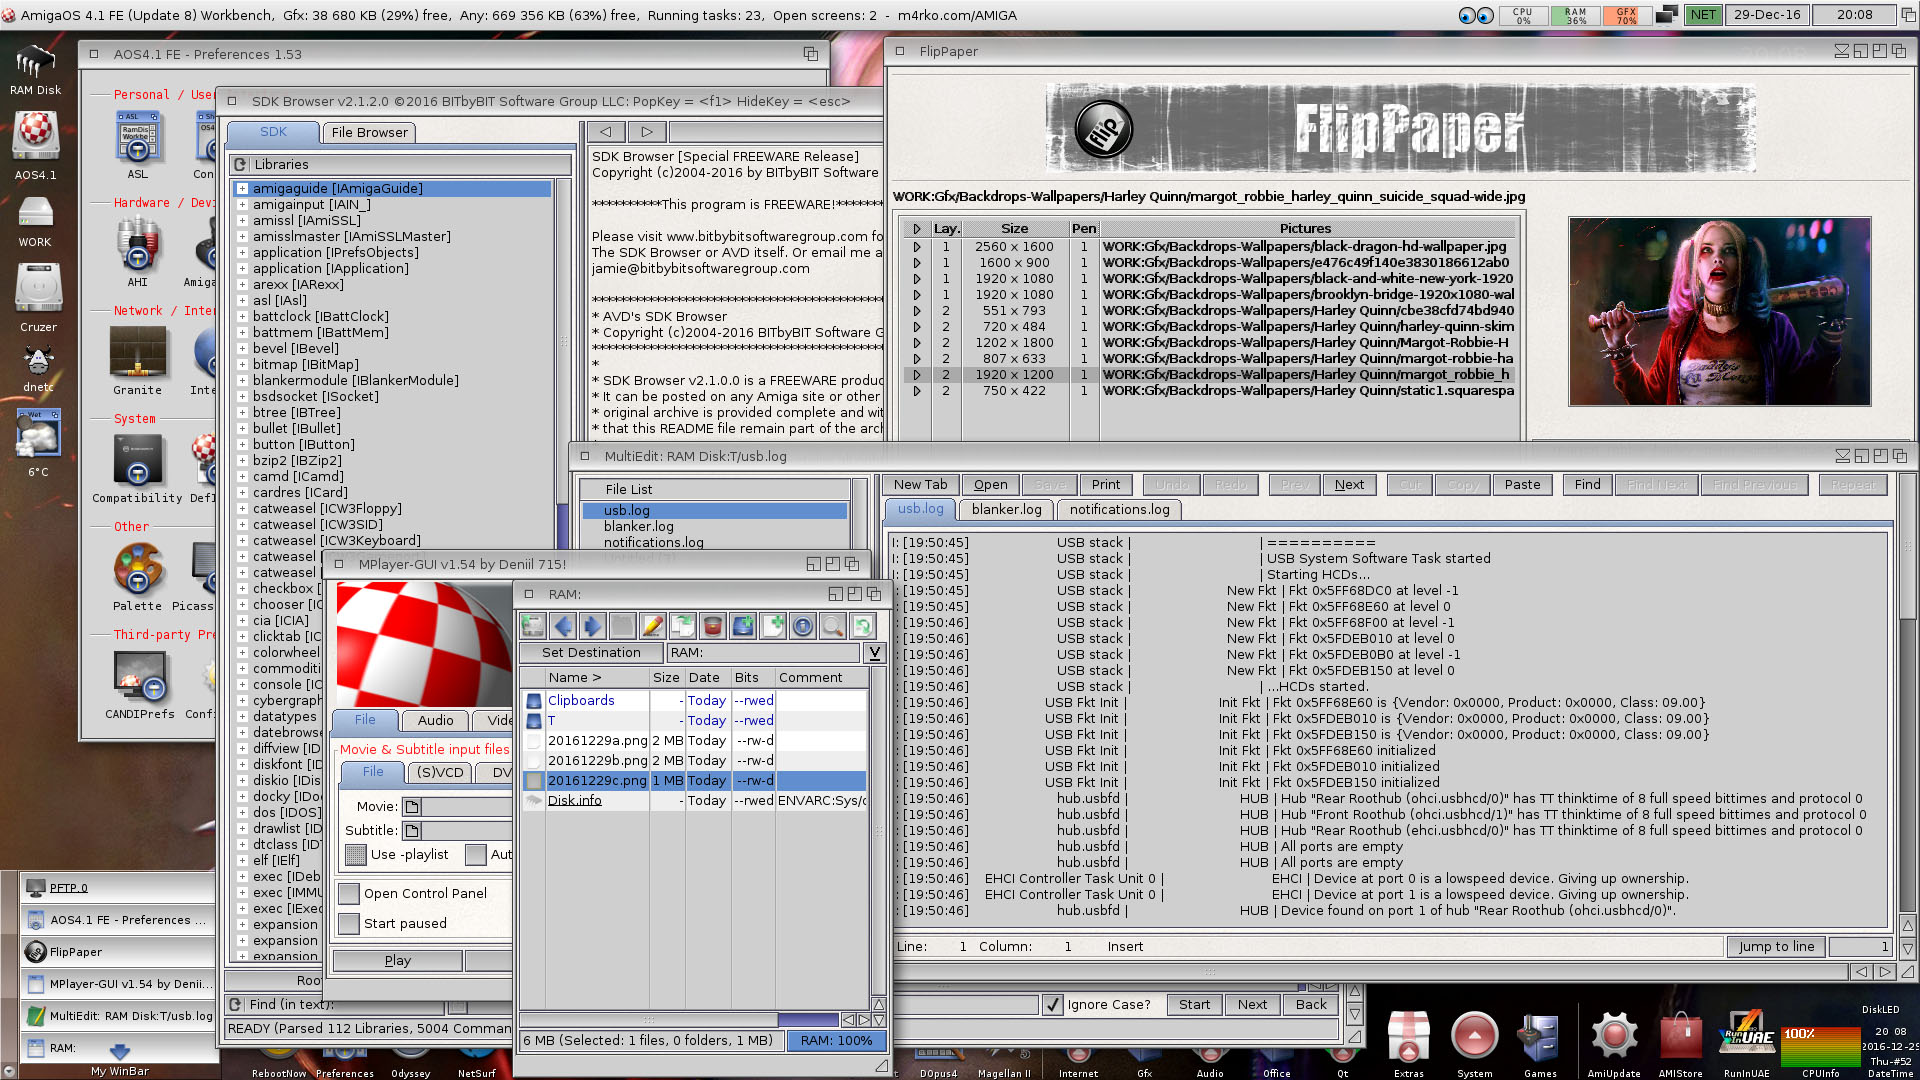 A bunch of apps in AmigaOS 4.1 FE